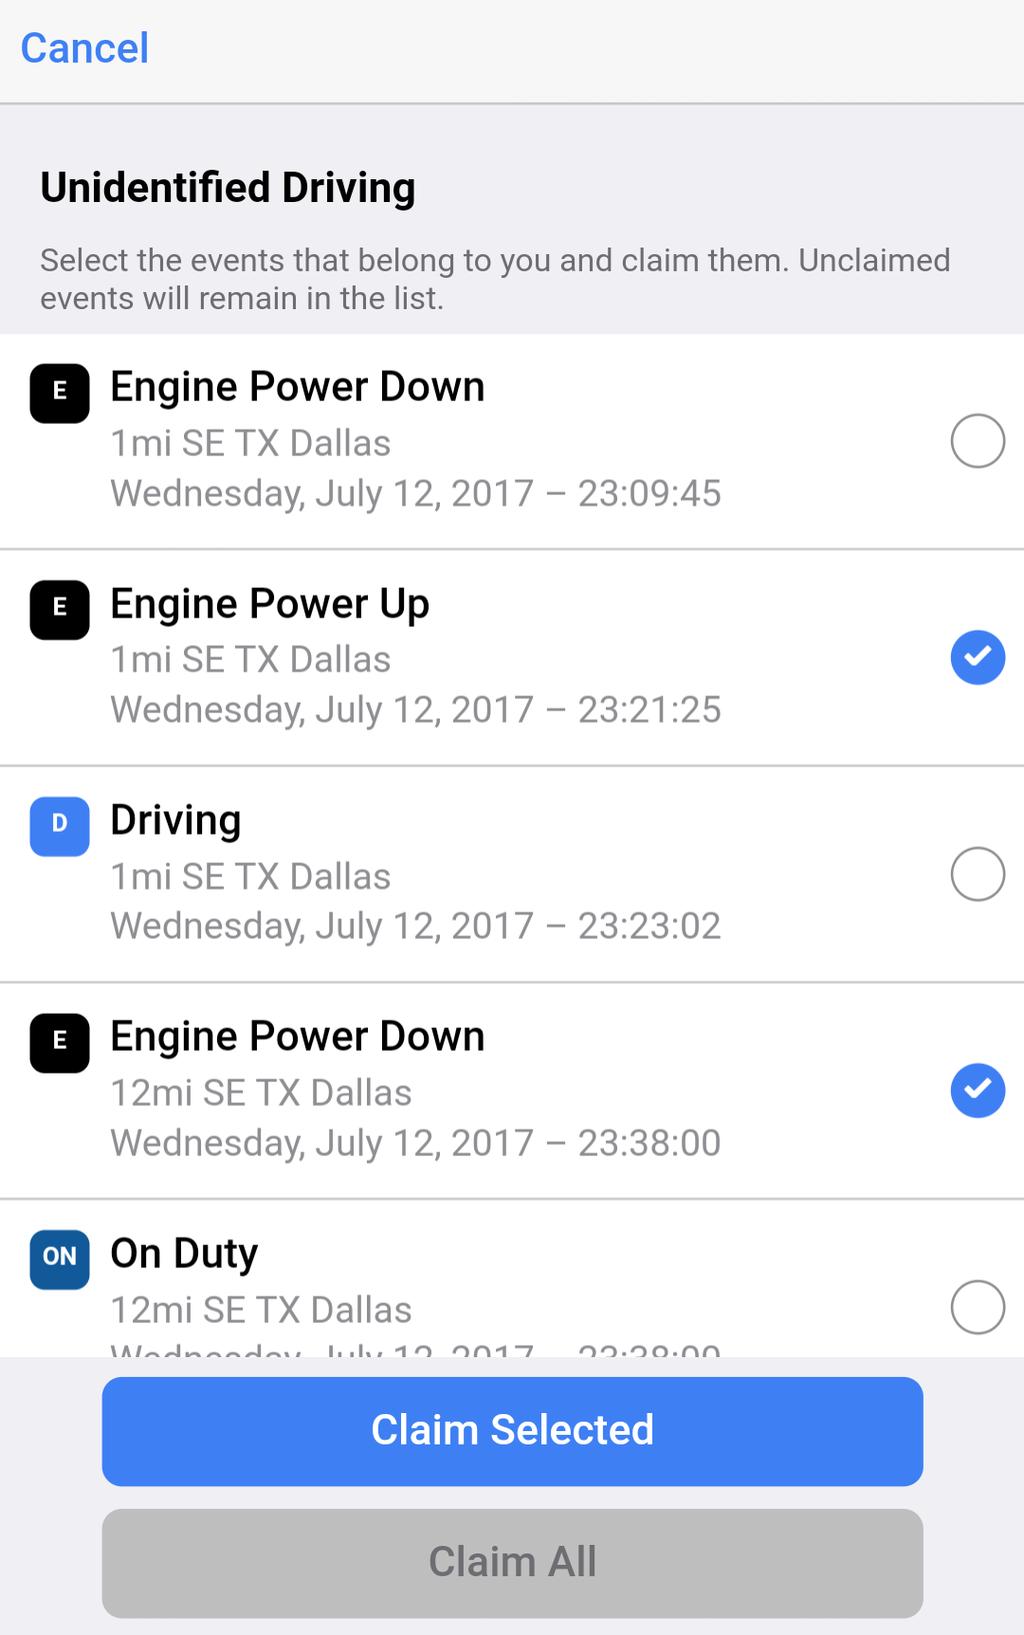 Claiming Unidentified Events Using the Inspector Mode If your vehicle has recorded any HOS events that are not assigned to a driver, The Inspector mode can be used by road side inspectors to view HOS